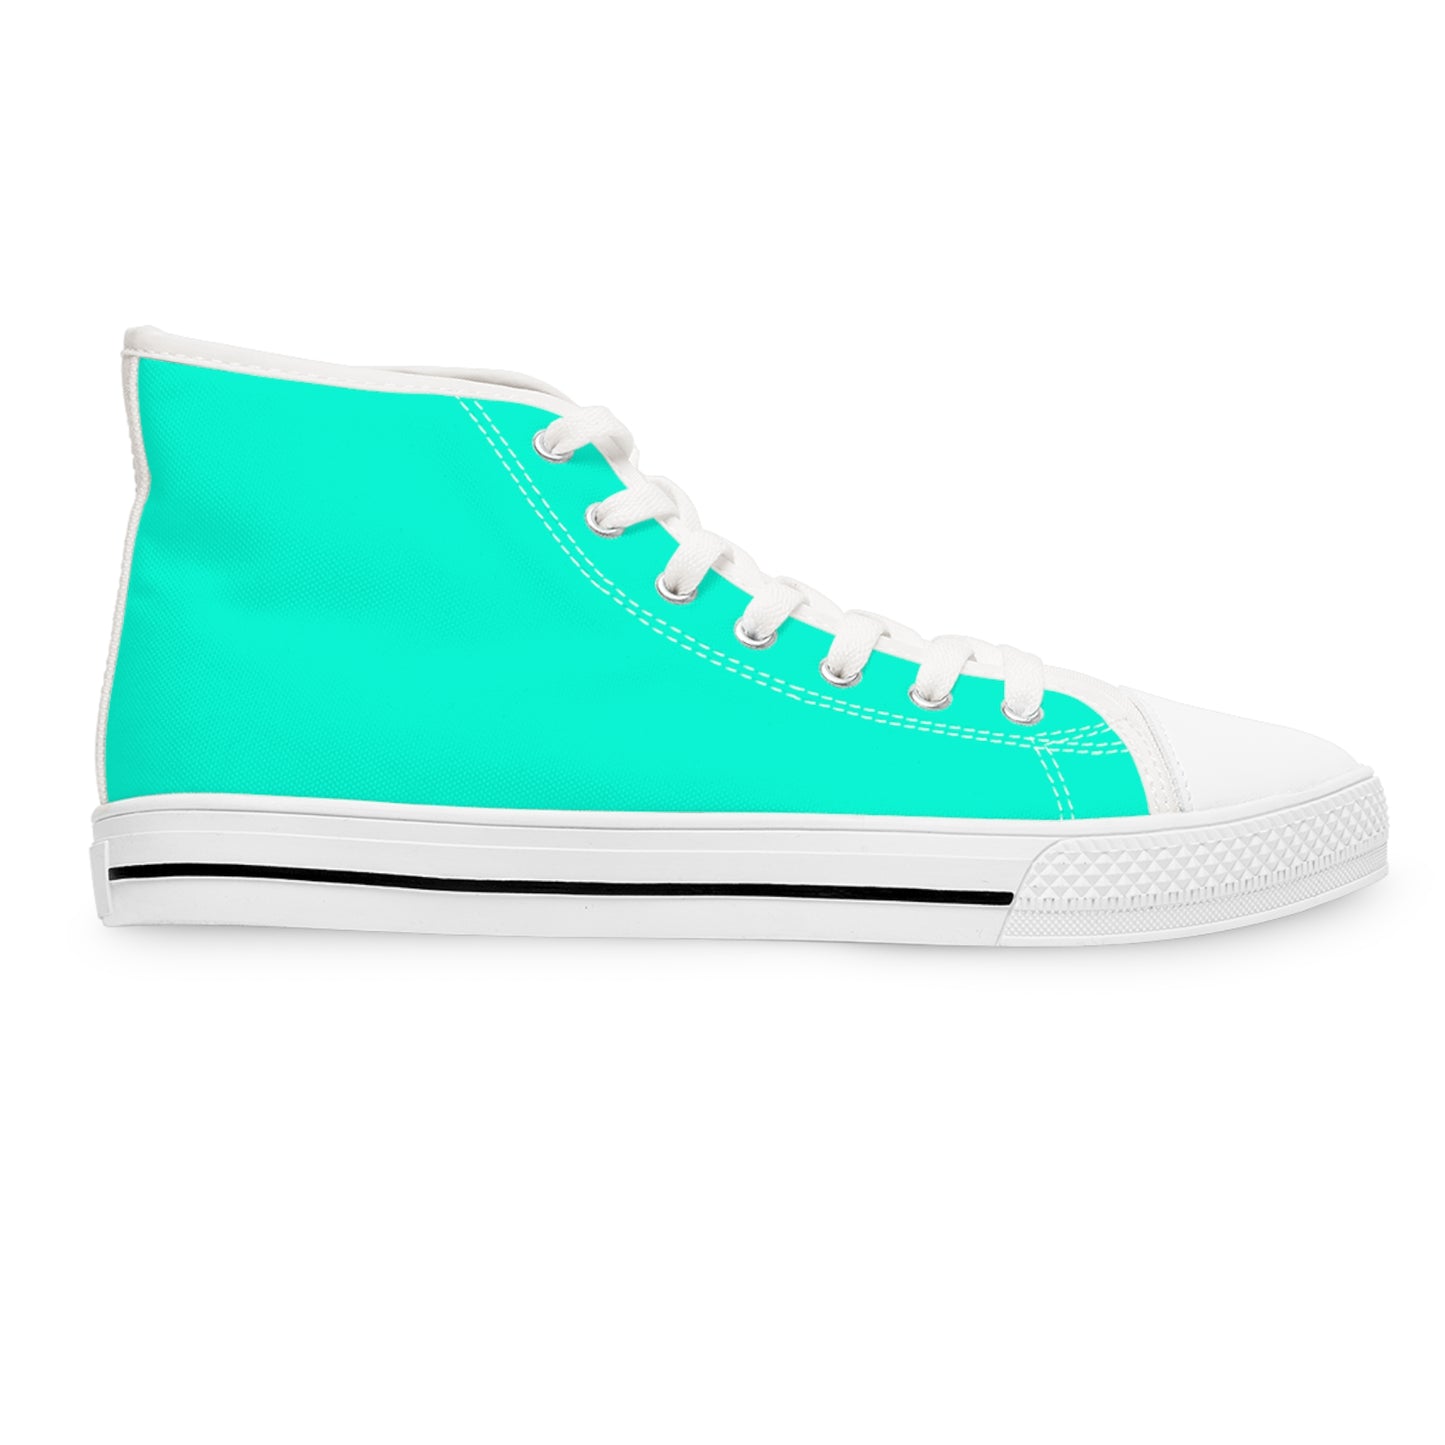 Women's Canvas High Top Solid Color Sneakers - Cool Pool Aqua Green US 12 White sole